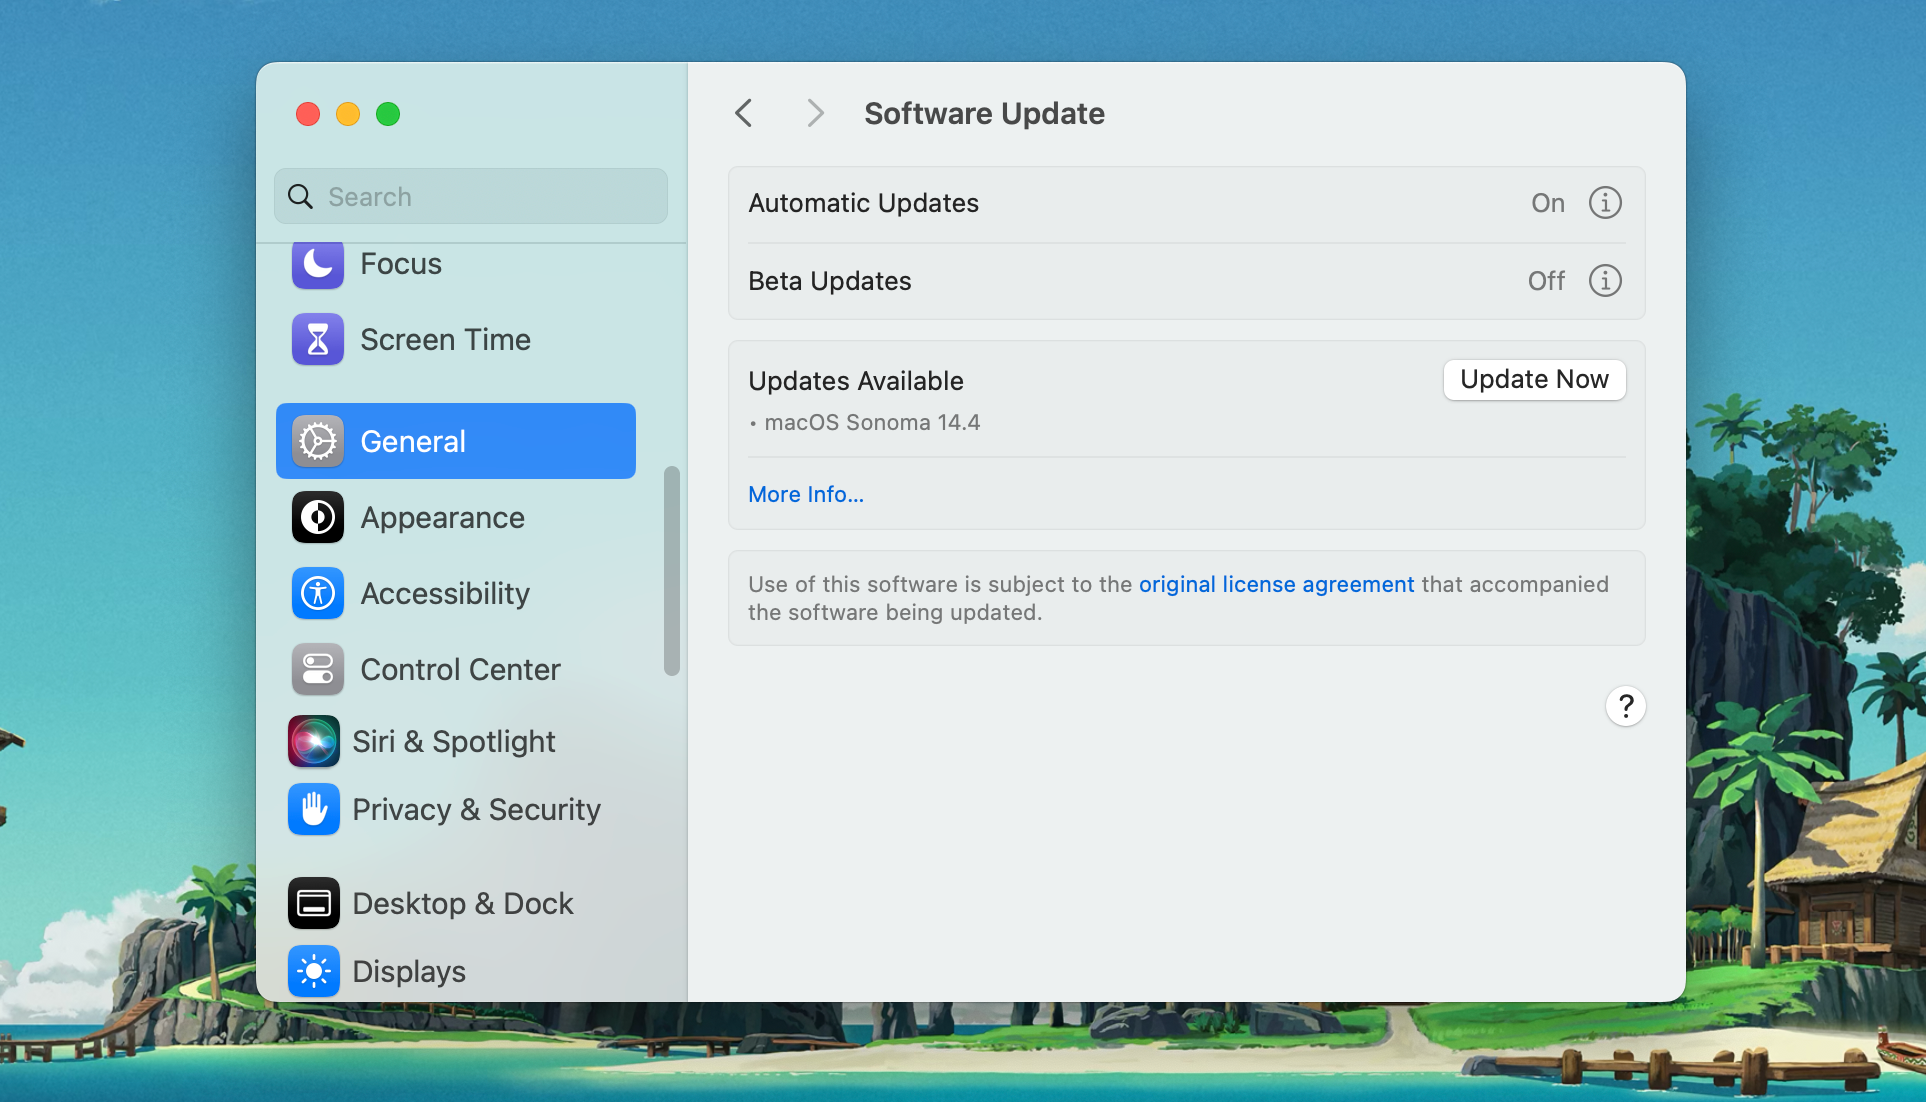 Software Update panel in macOS System Settings